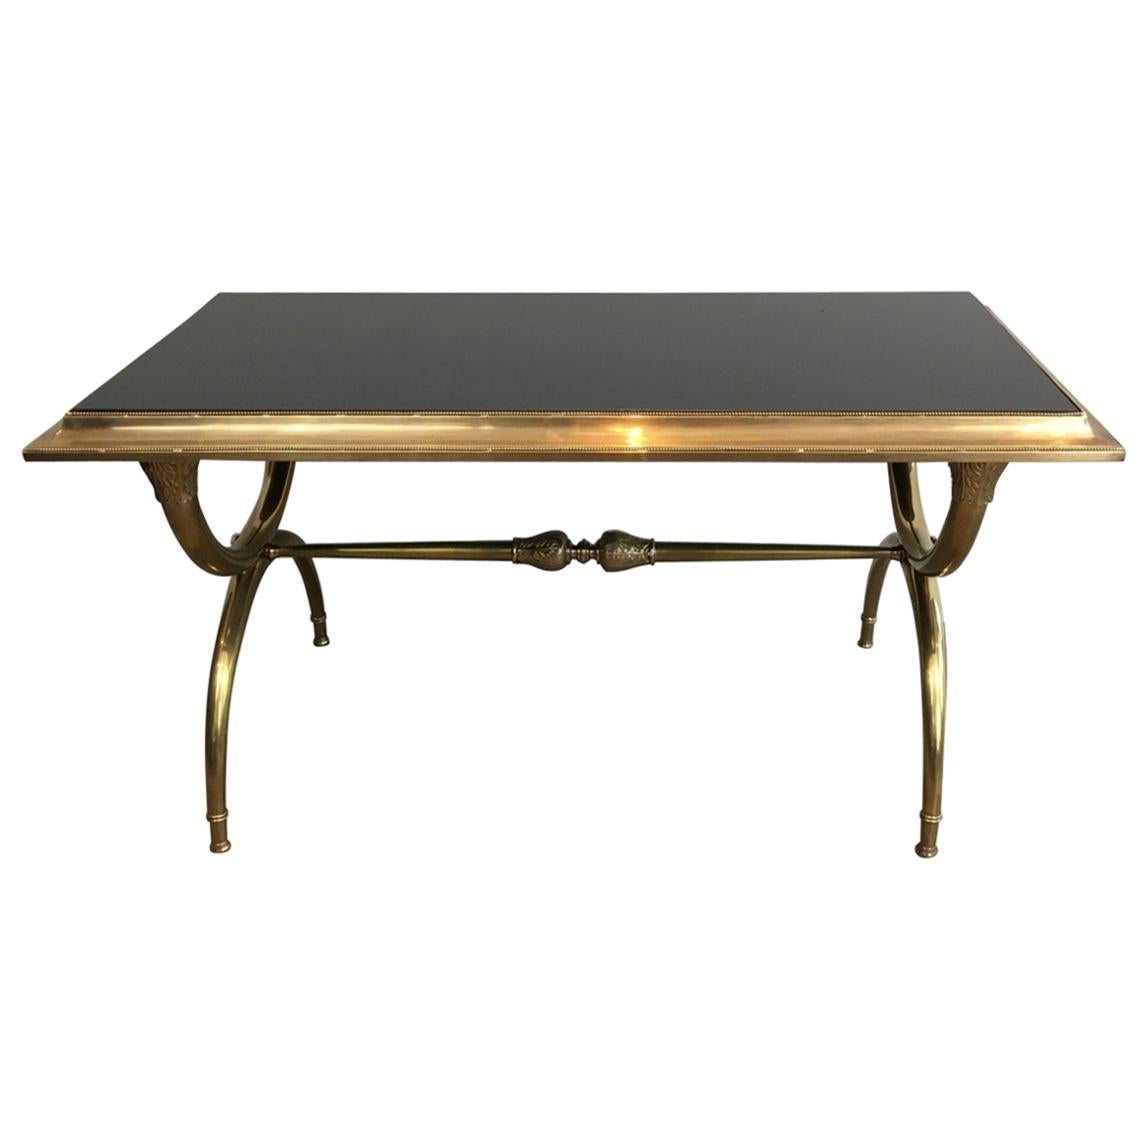 Attributed to Raymond Subes, Neoclassical Bronze and Bass Coffee Table